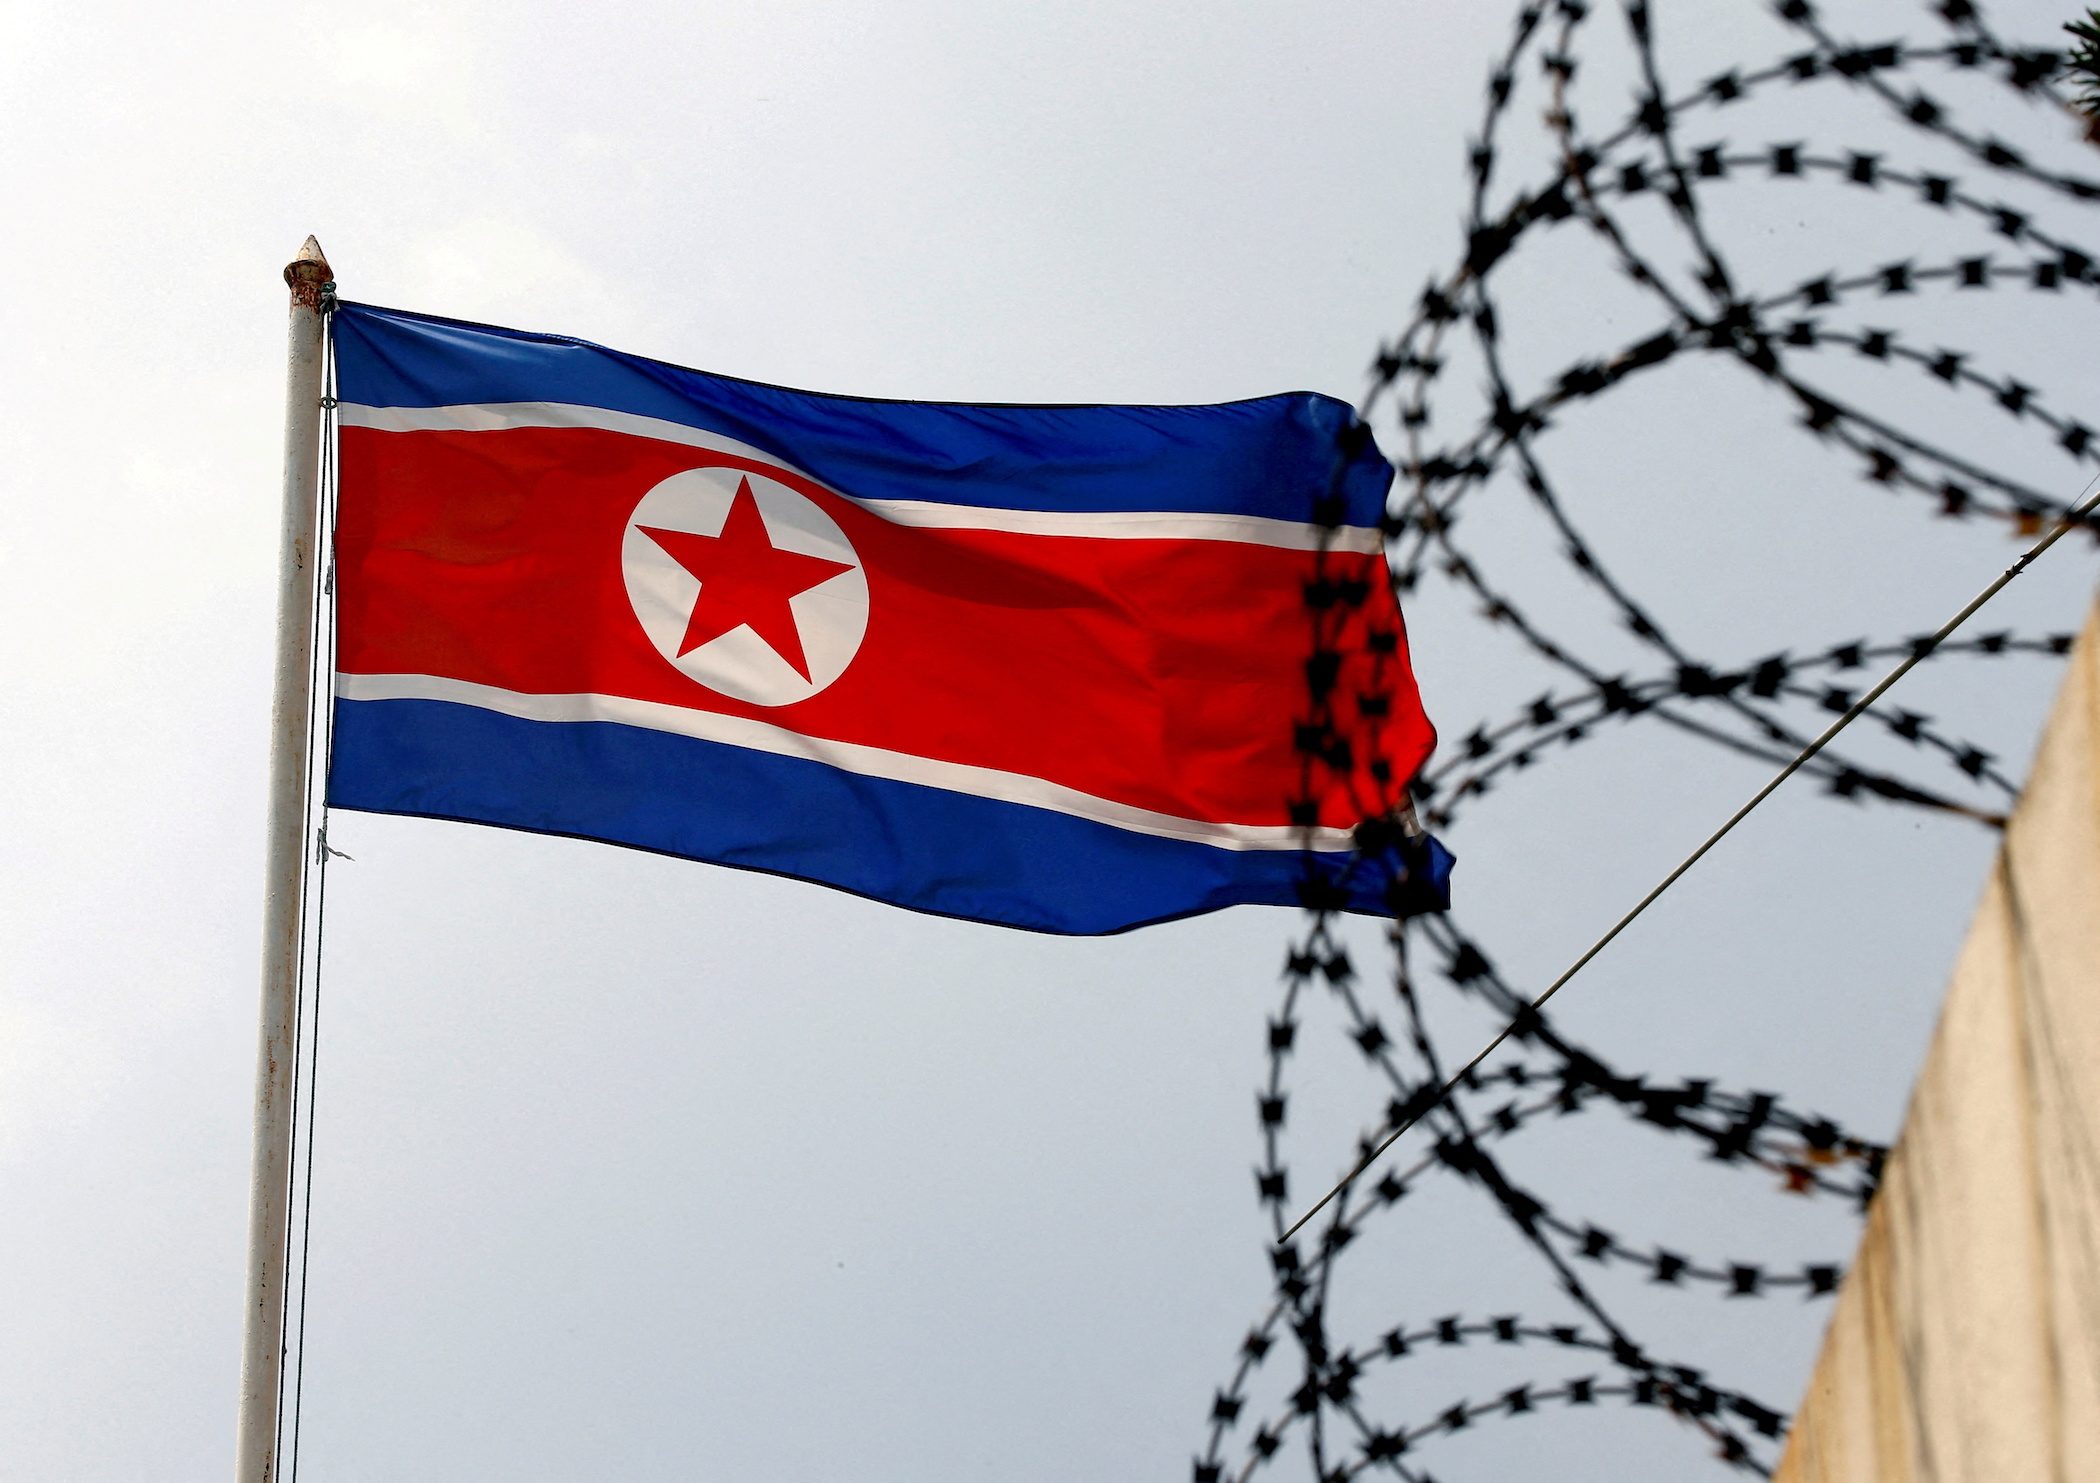 US crypto researcher sentenced to five years for helping North Korea evade sanctions